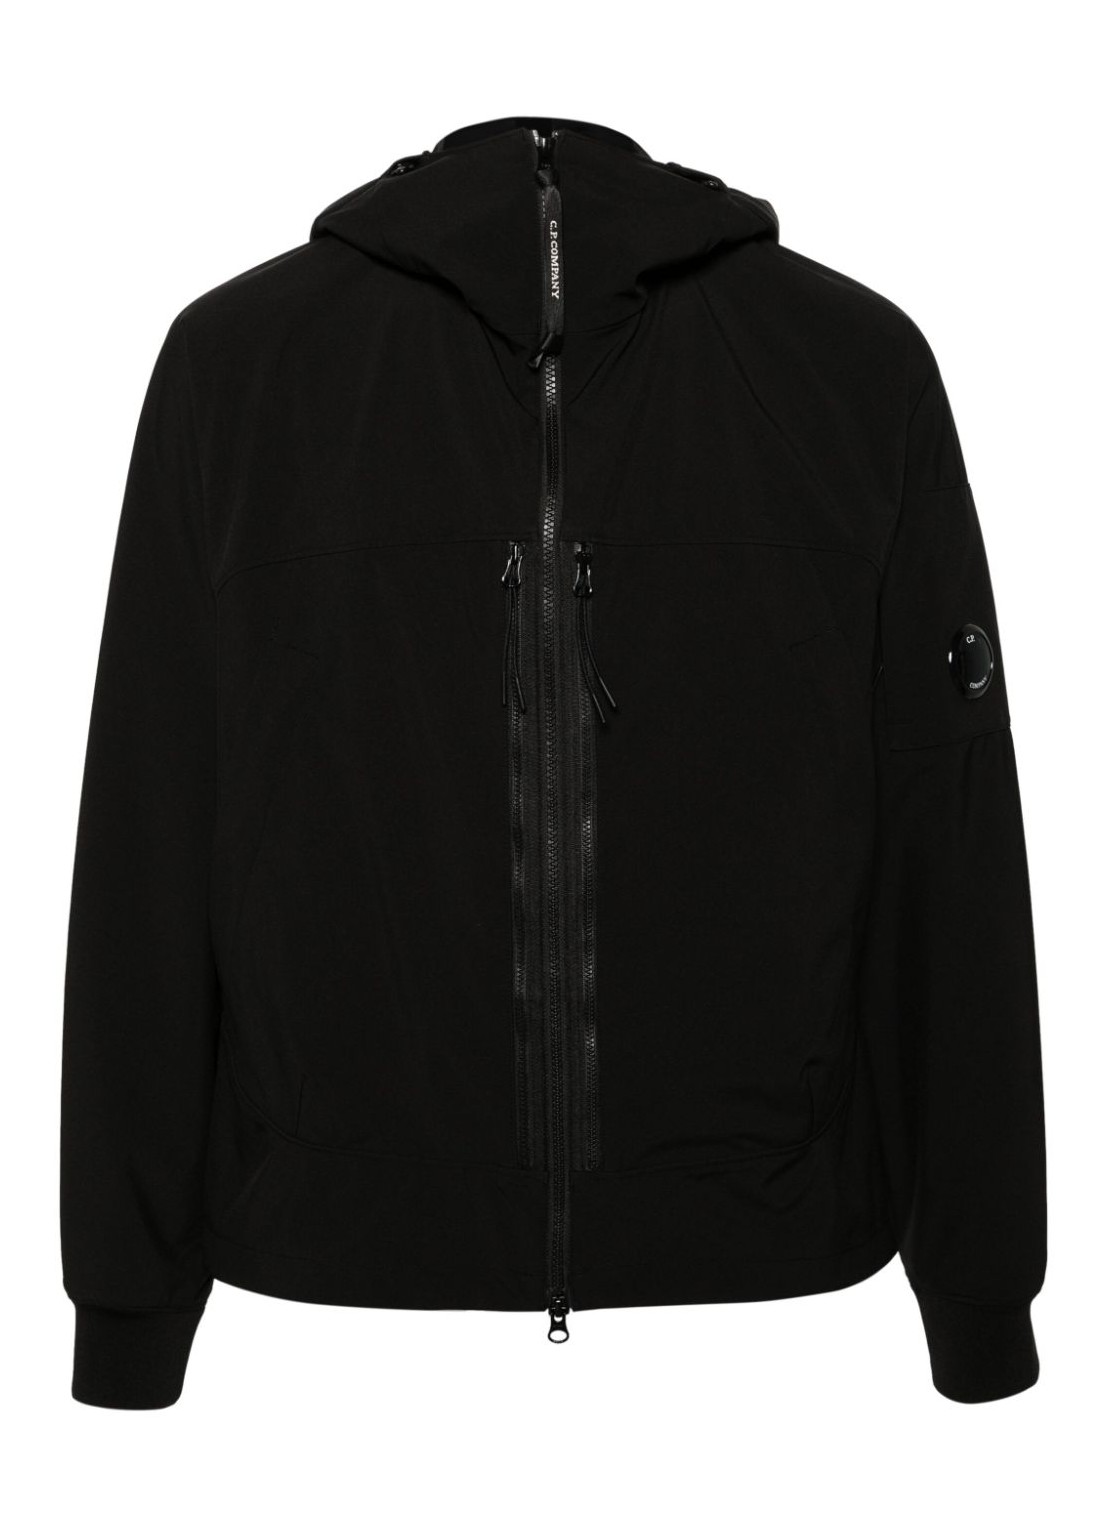 Outerwear c.p.company outerwear man c.p. shell-r hooded jacket 16cmow008a005968a 999 talla negro
 